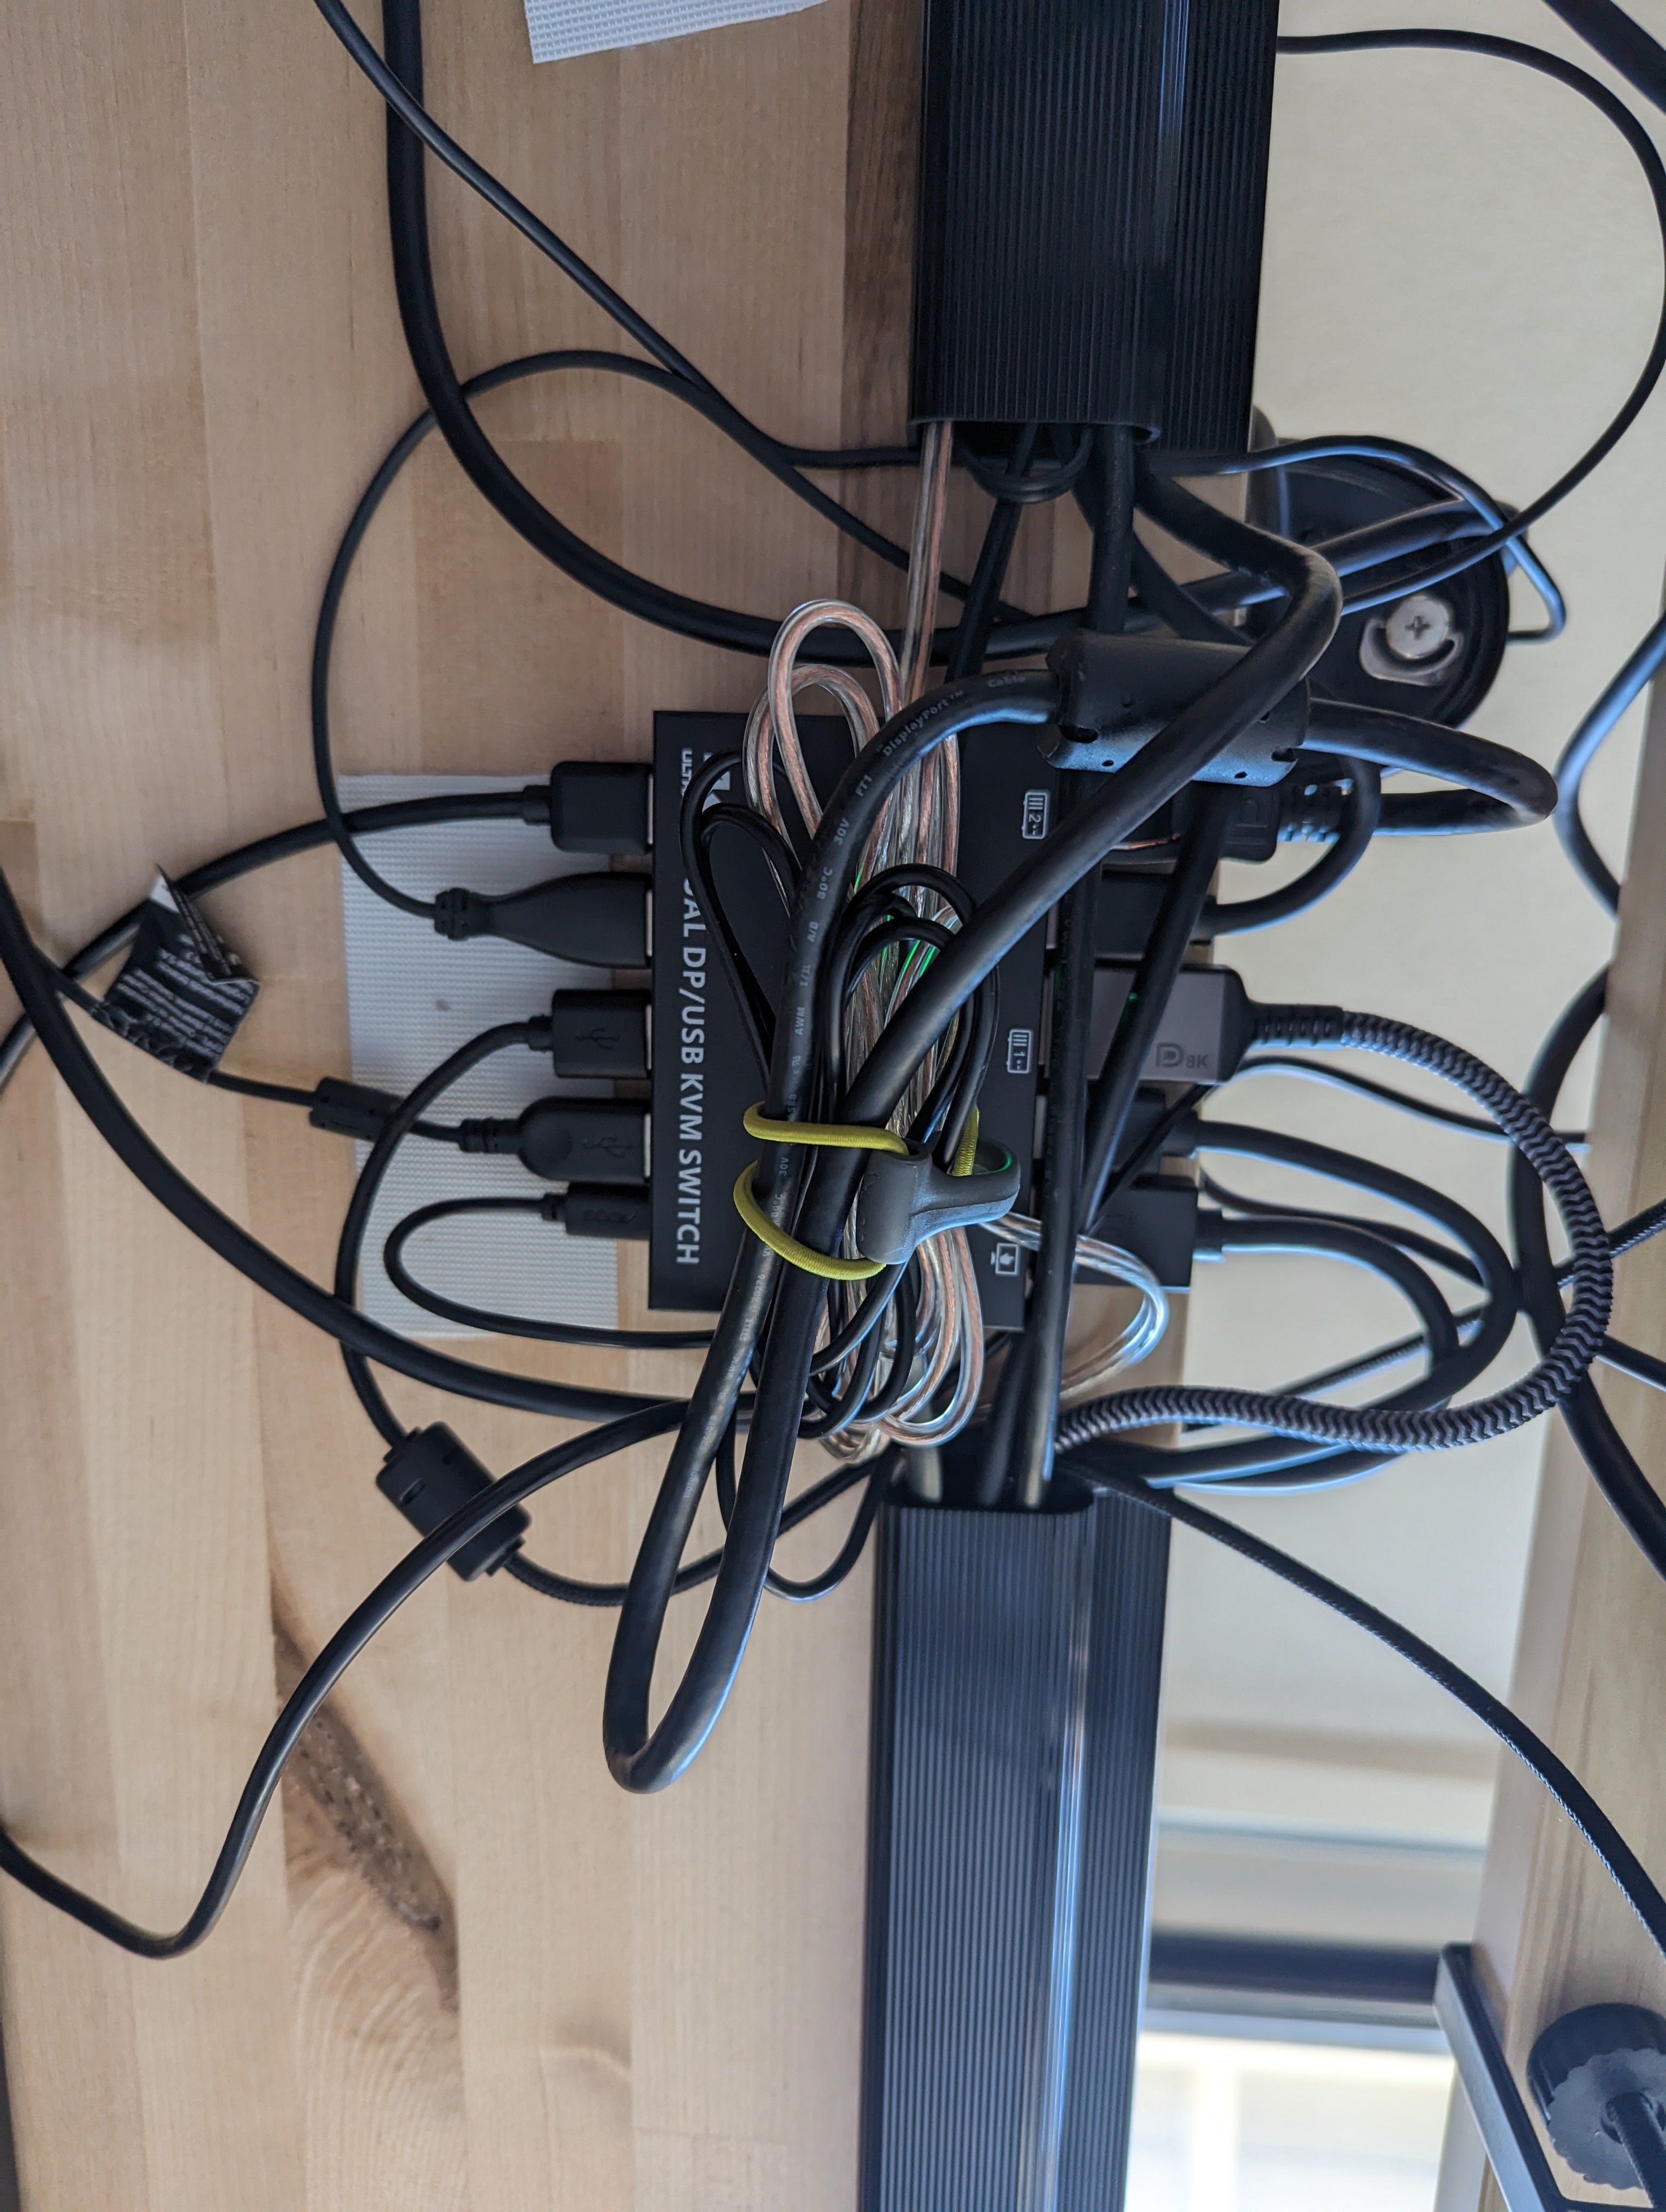 Hidden nest of cables going into KVM